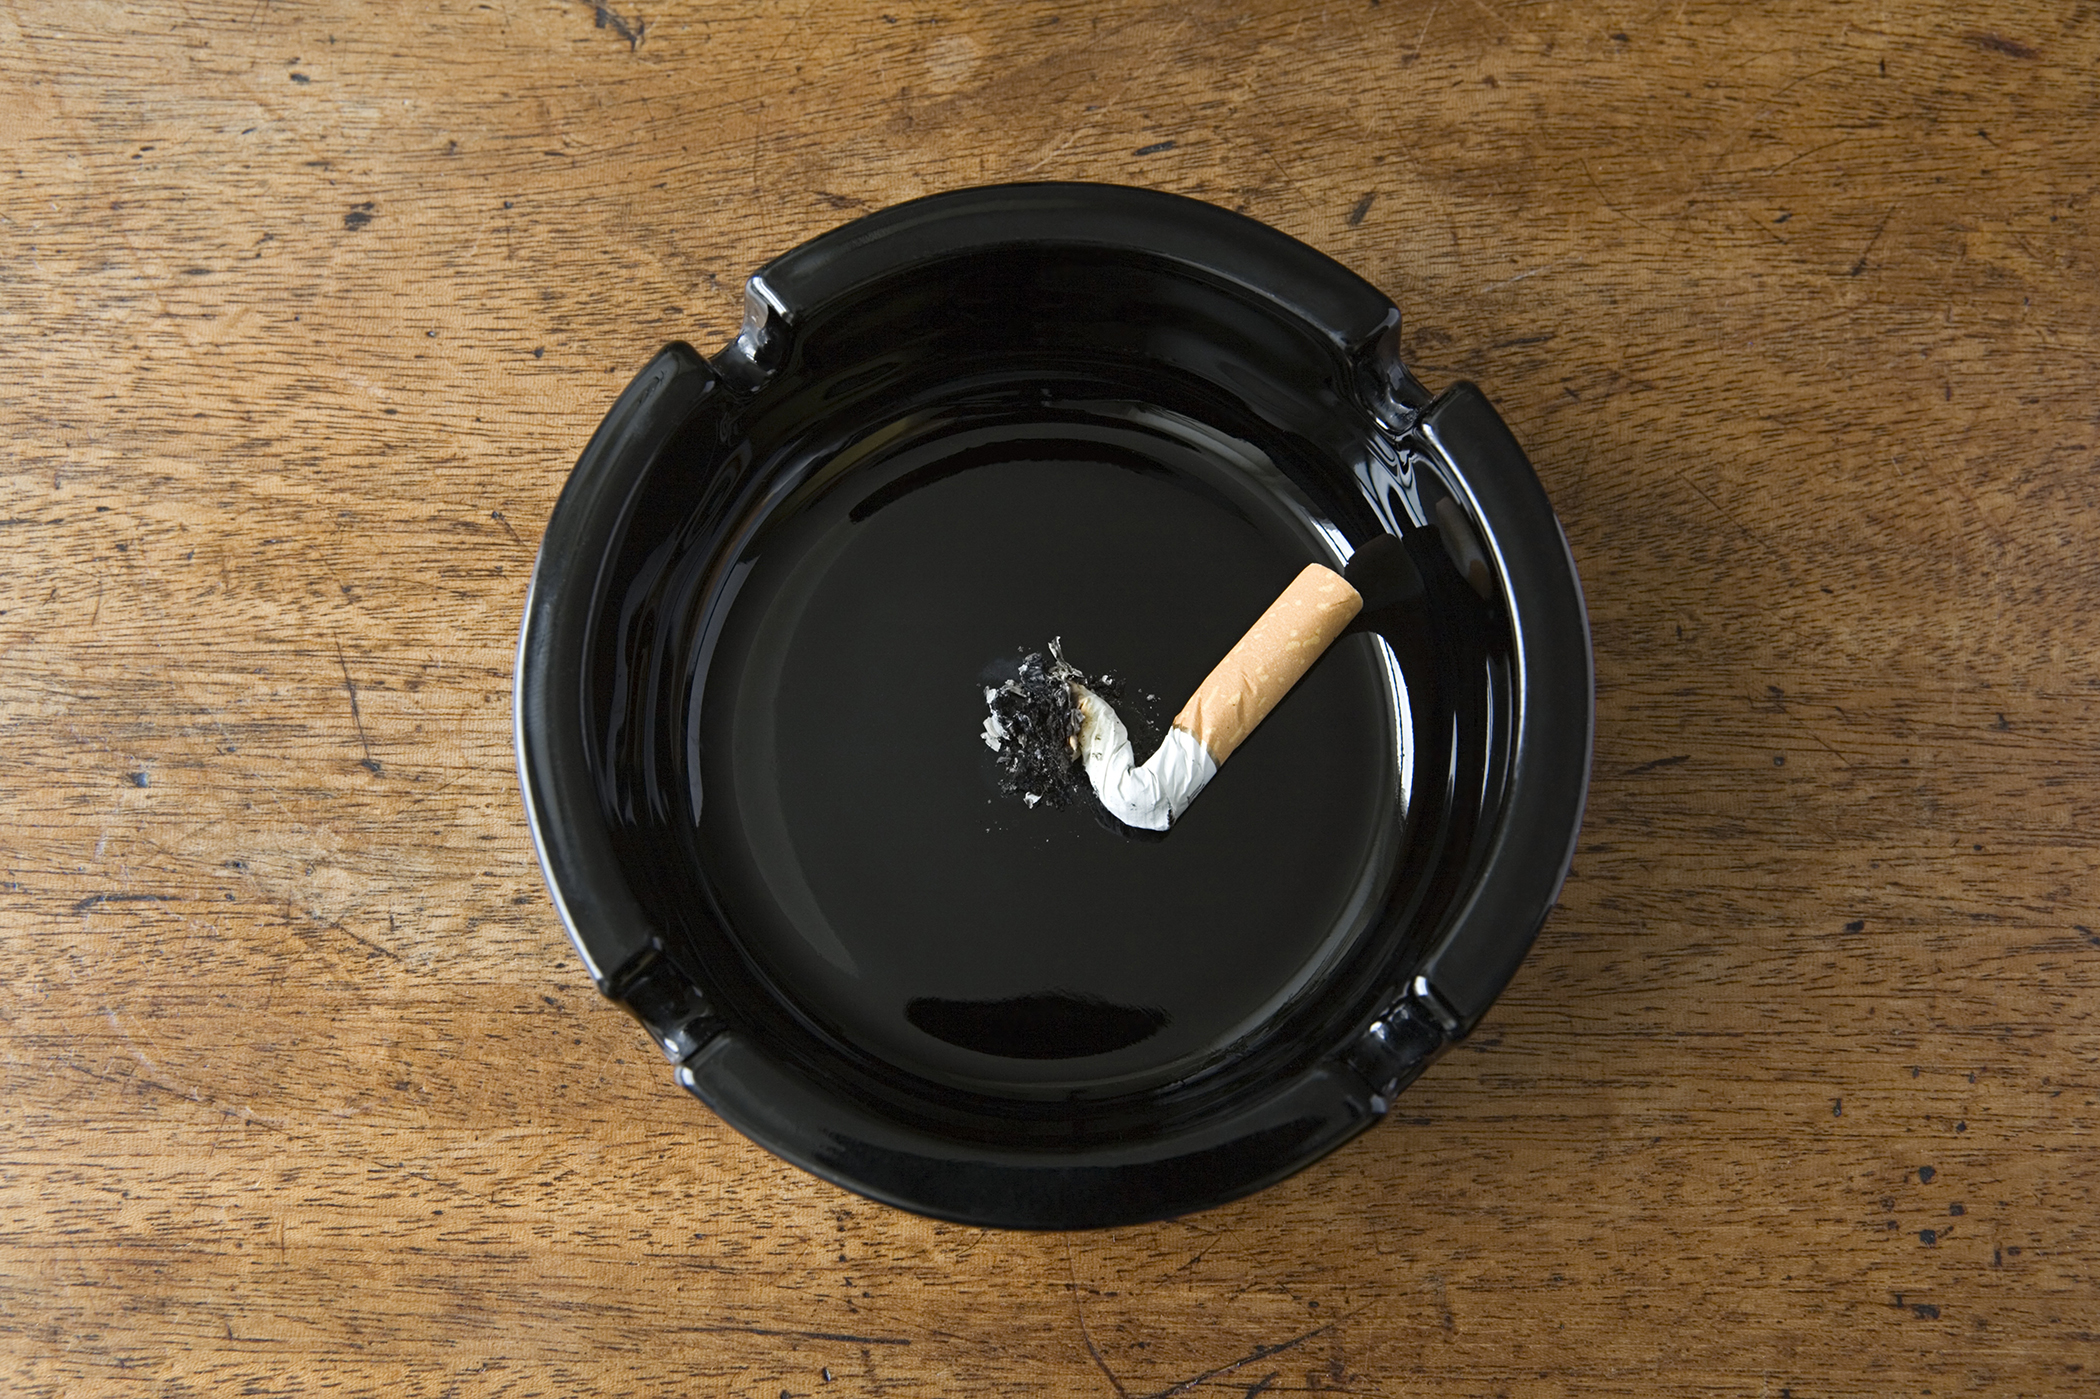 Smoking May Hurt Your Job Prospects and Wages